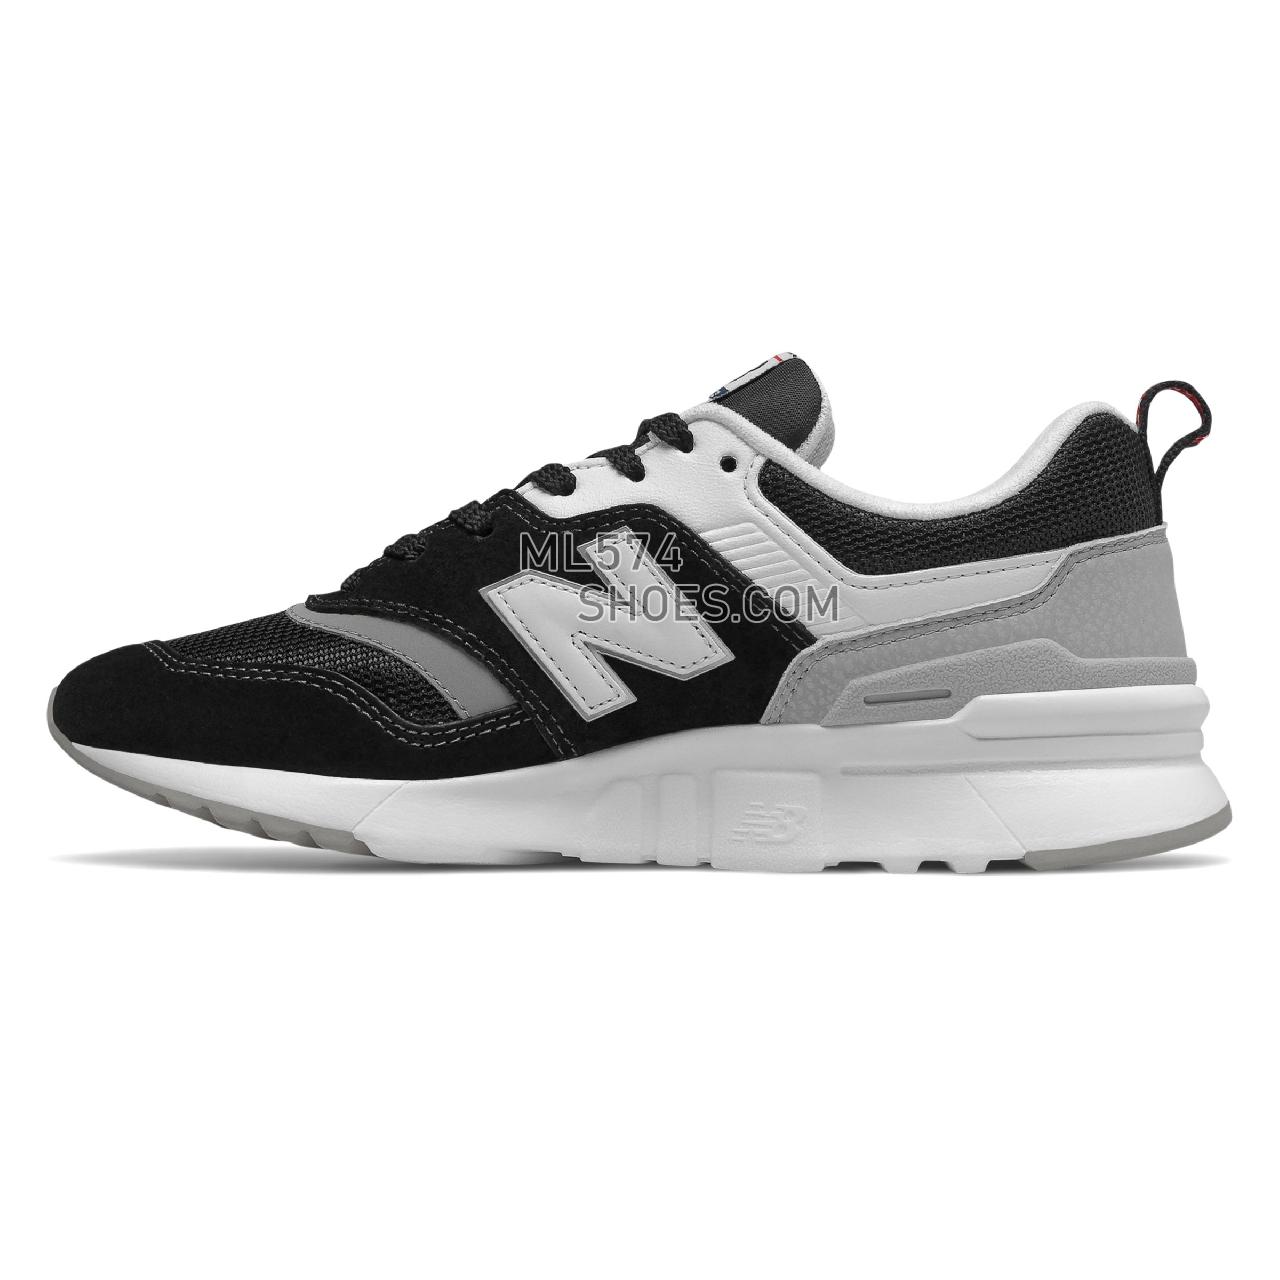 New Balance 997H - Women's Classic Sneakers - Black with Team Red and White - CW997HAE